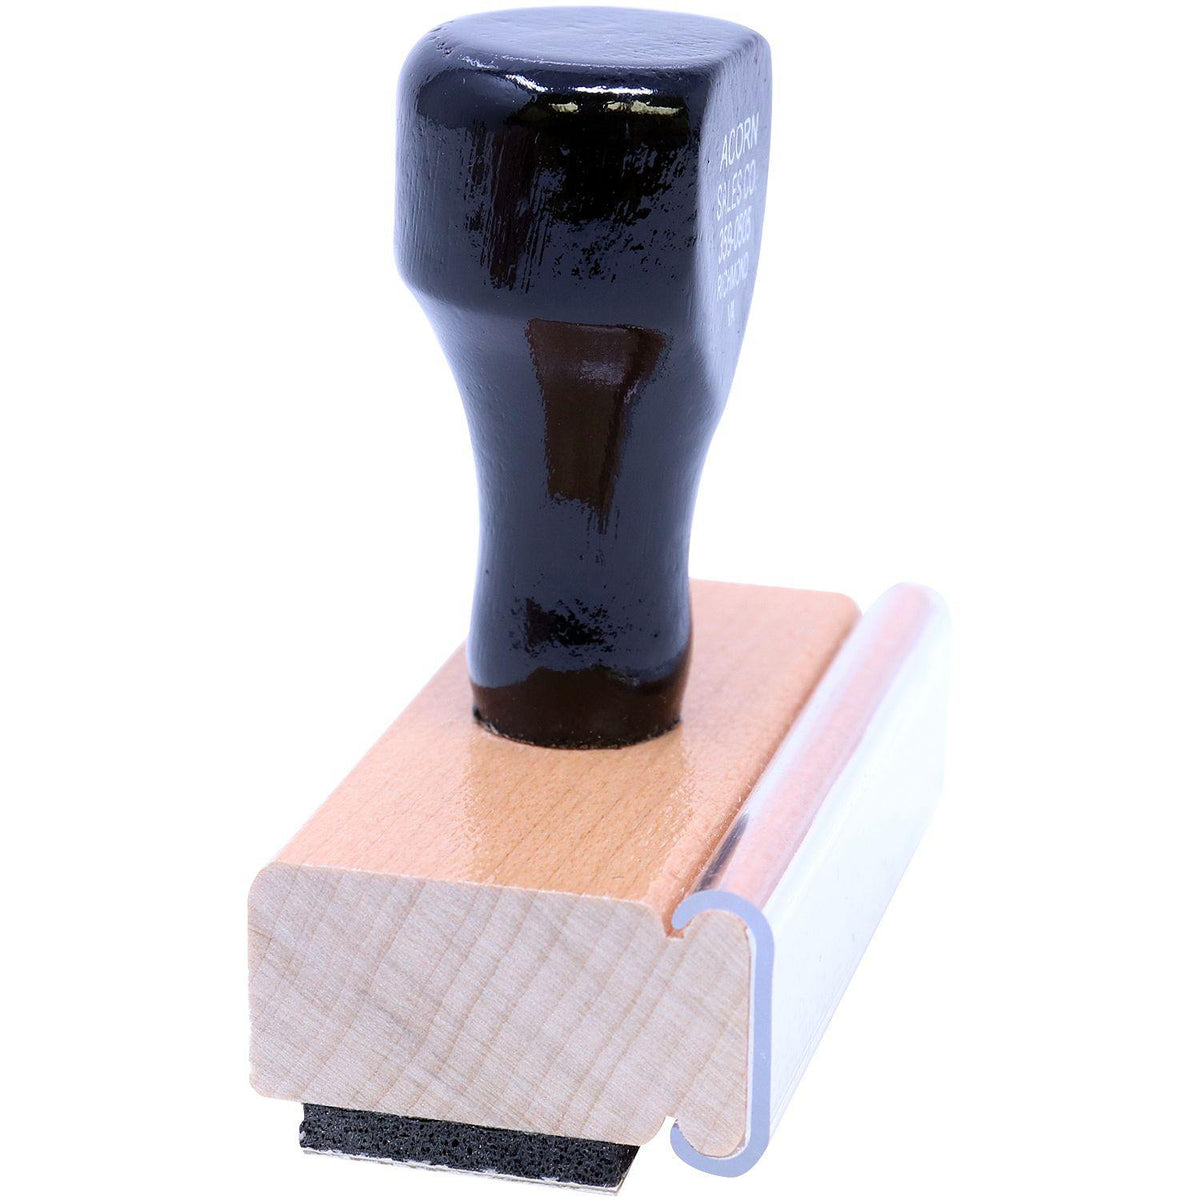 Side View of Large Joint Exhibit Rubber Stamp at an Angle